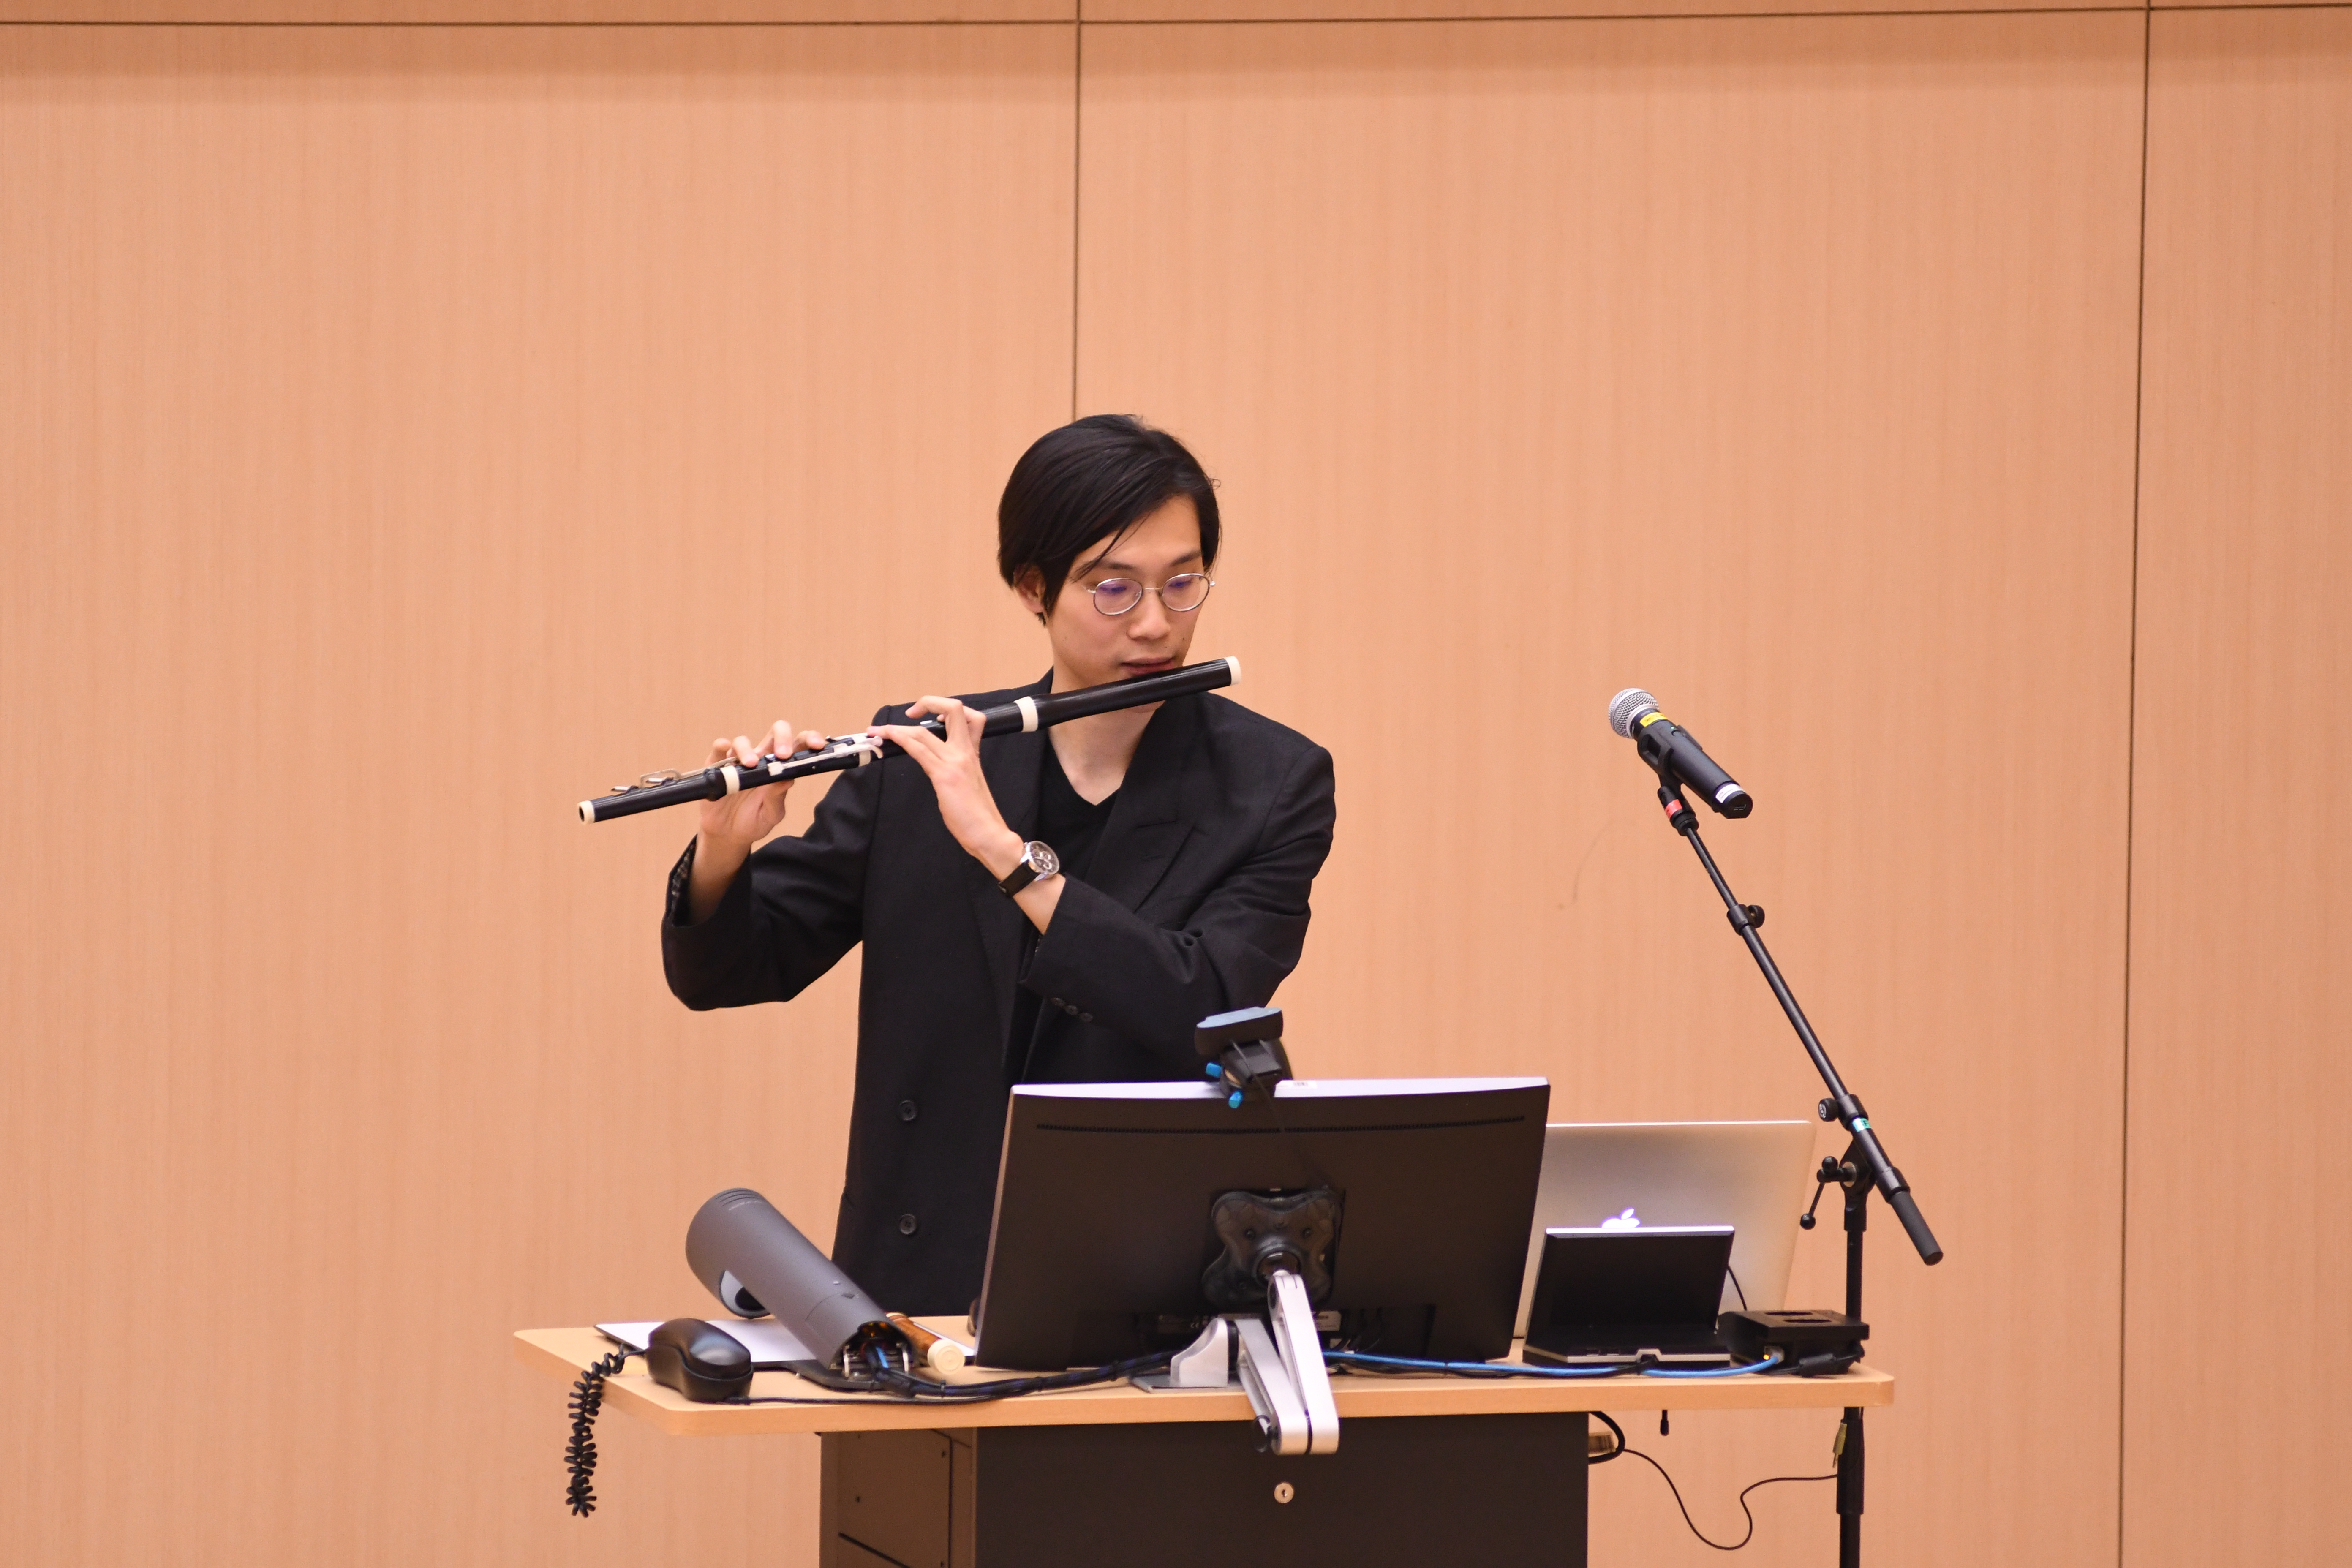 HKUST Arts Festival 2023 - The Evolution of Flute from Baroque to Modern Periods by TSANG Yat-ho